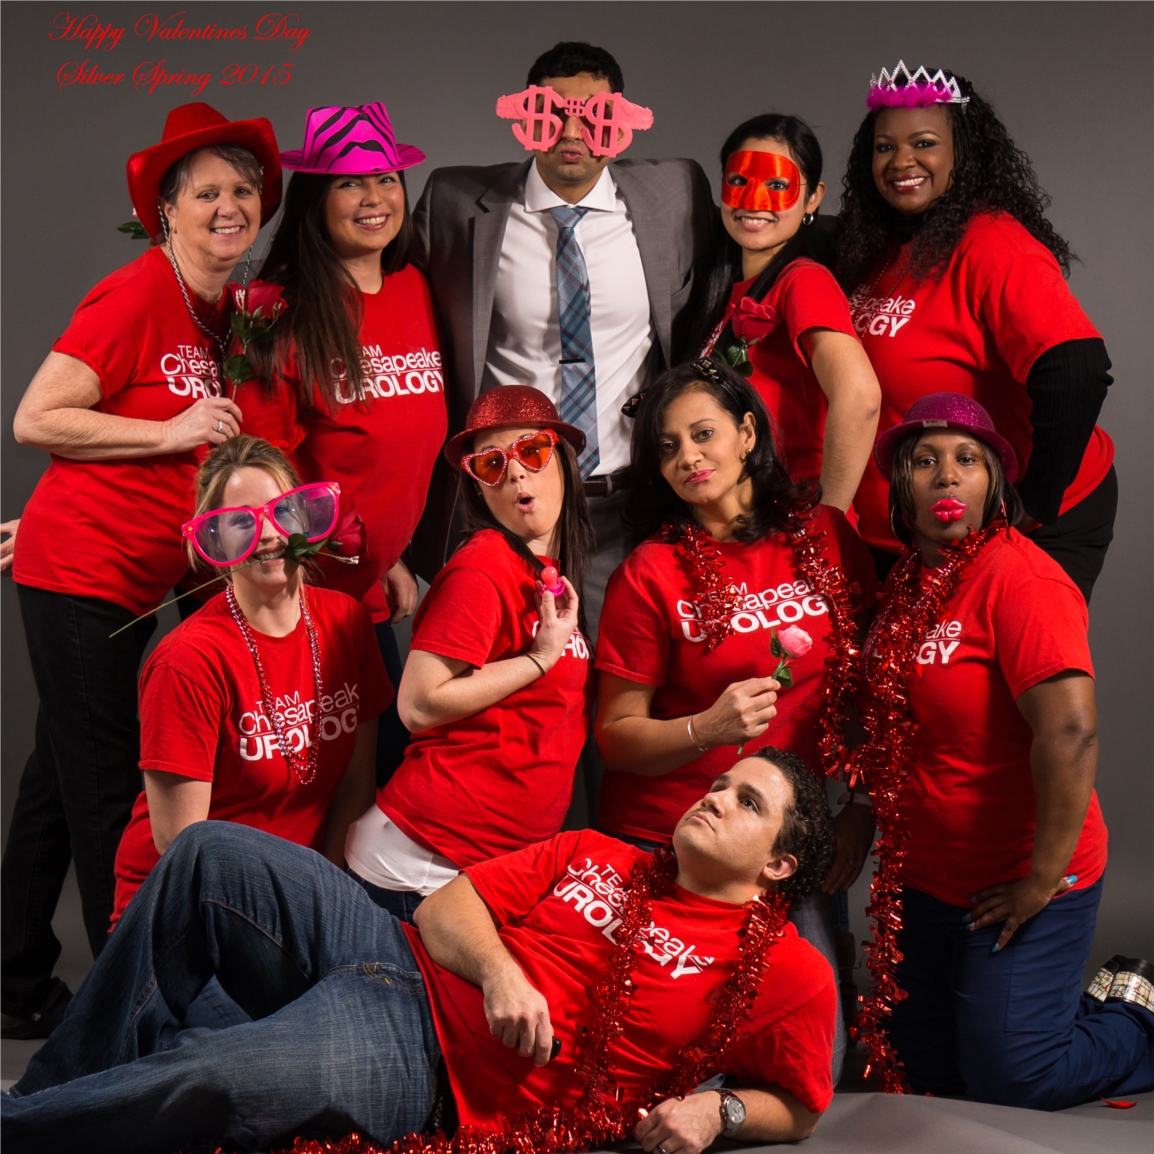 Our Silver Spring staff wishing everyone a Happy Valentine's Day!  